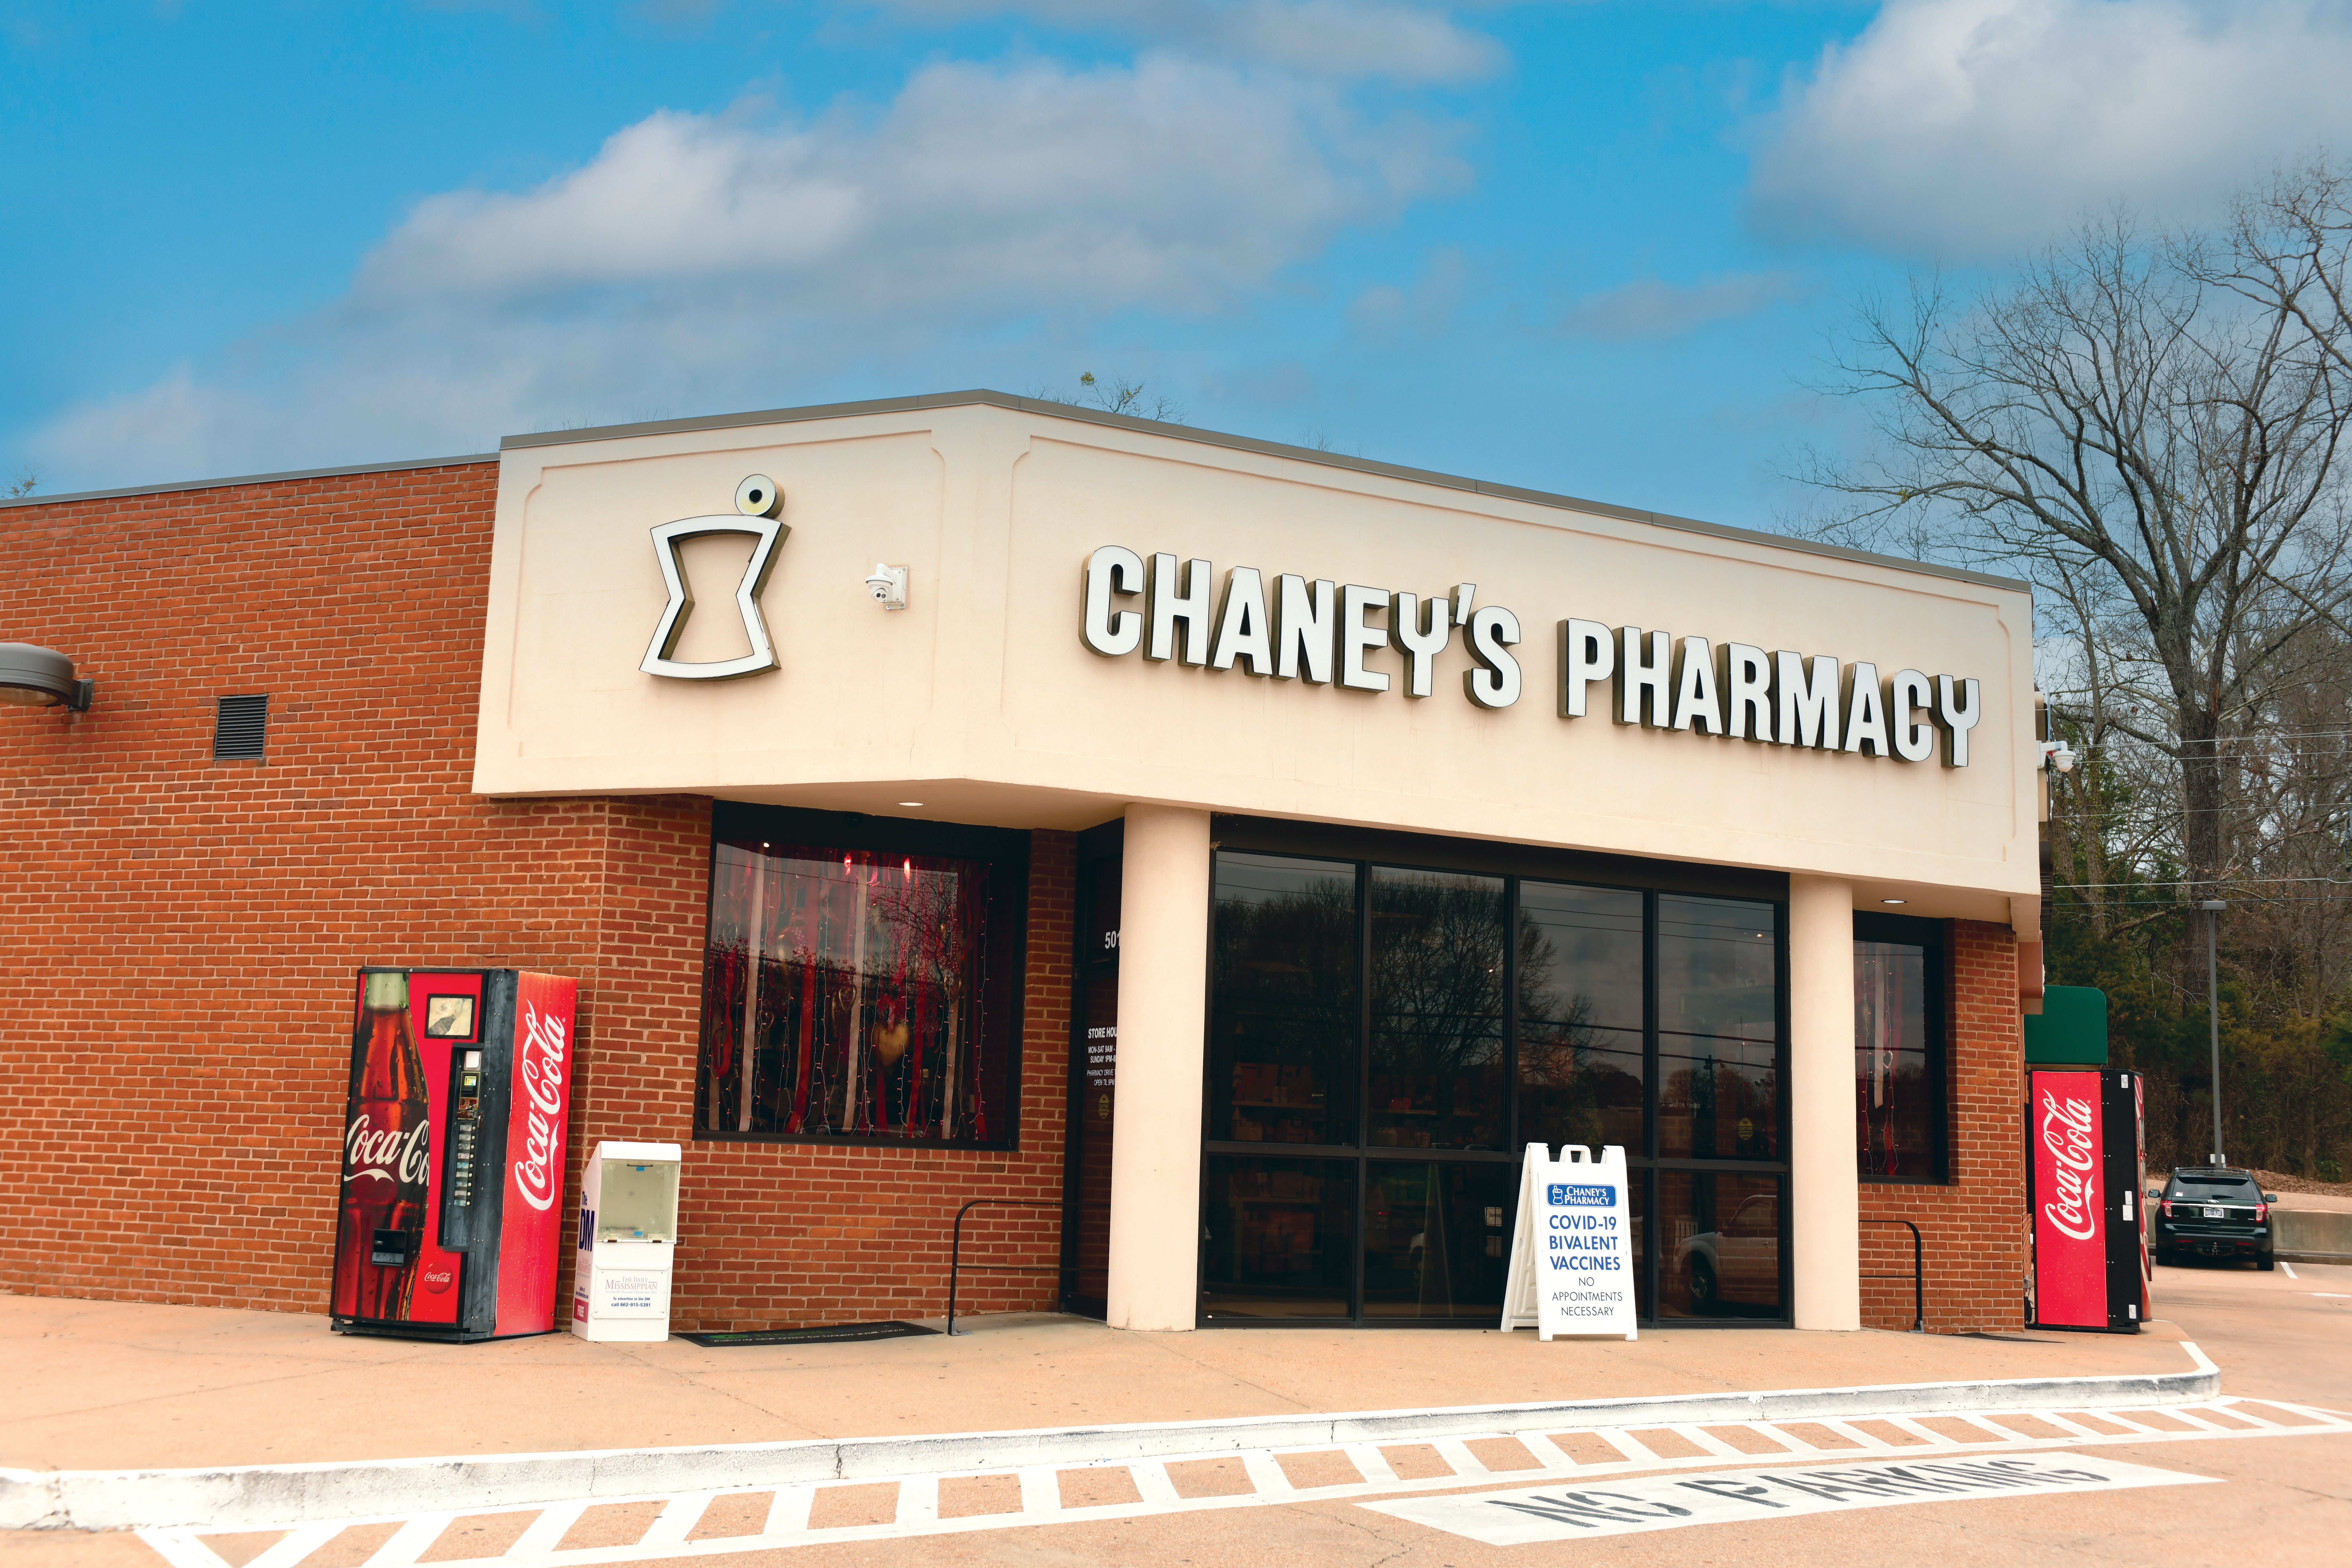 Laura and Brent Smith: Decades of greatness at Chaney’s Pharmacy